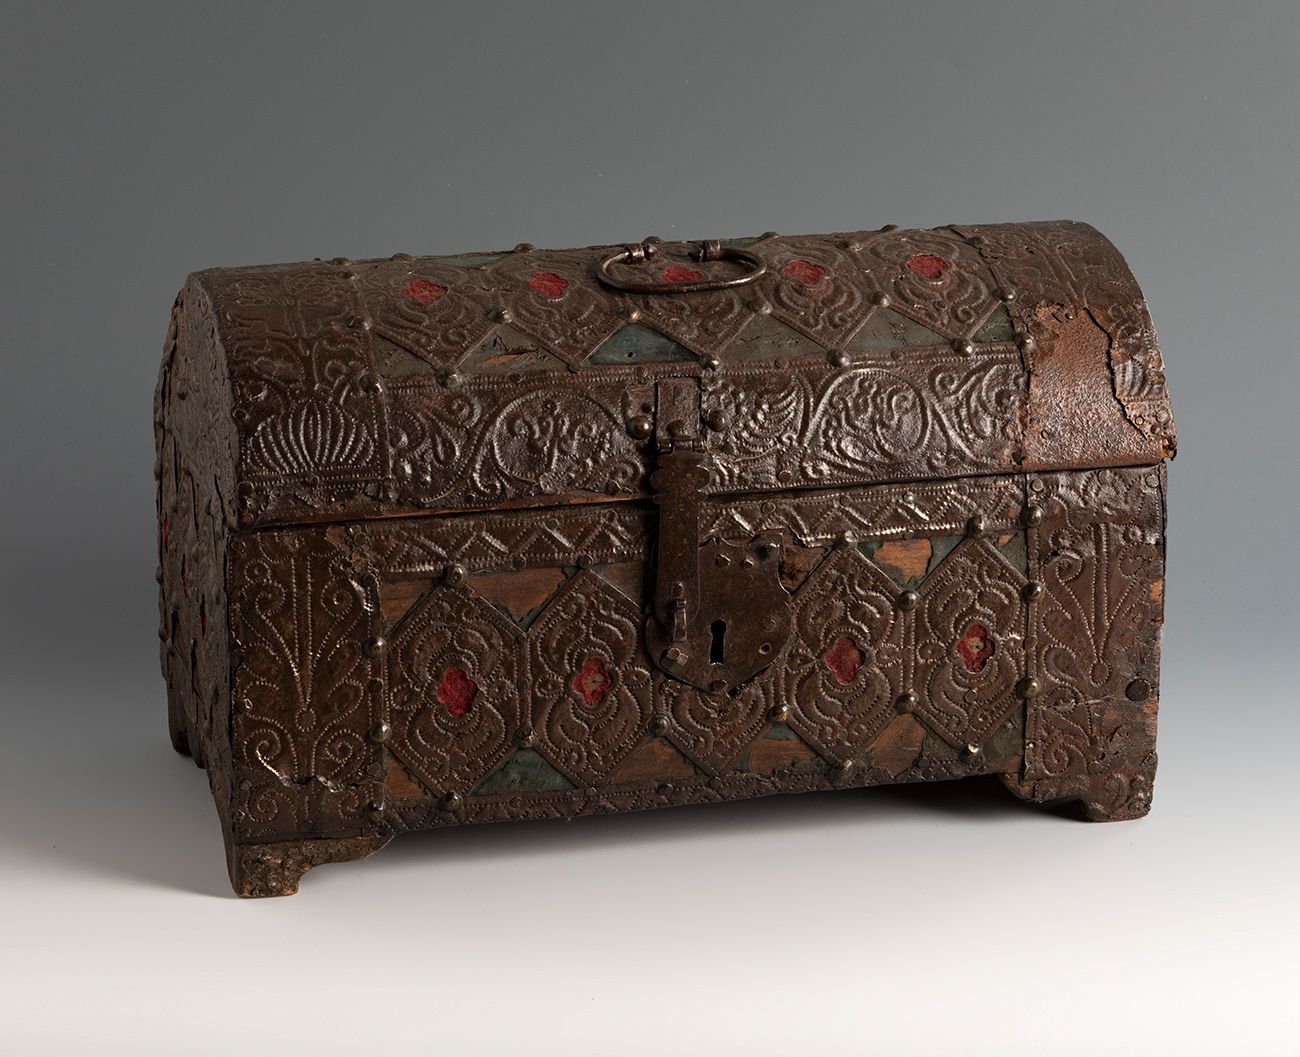 Null Chest; 16th-17th century.
Wood covered with bronze plates and fabric.
The f&hellip;